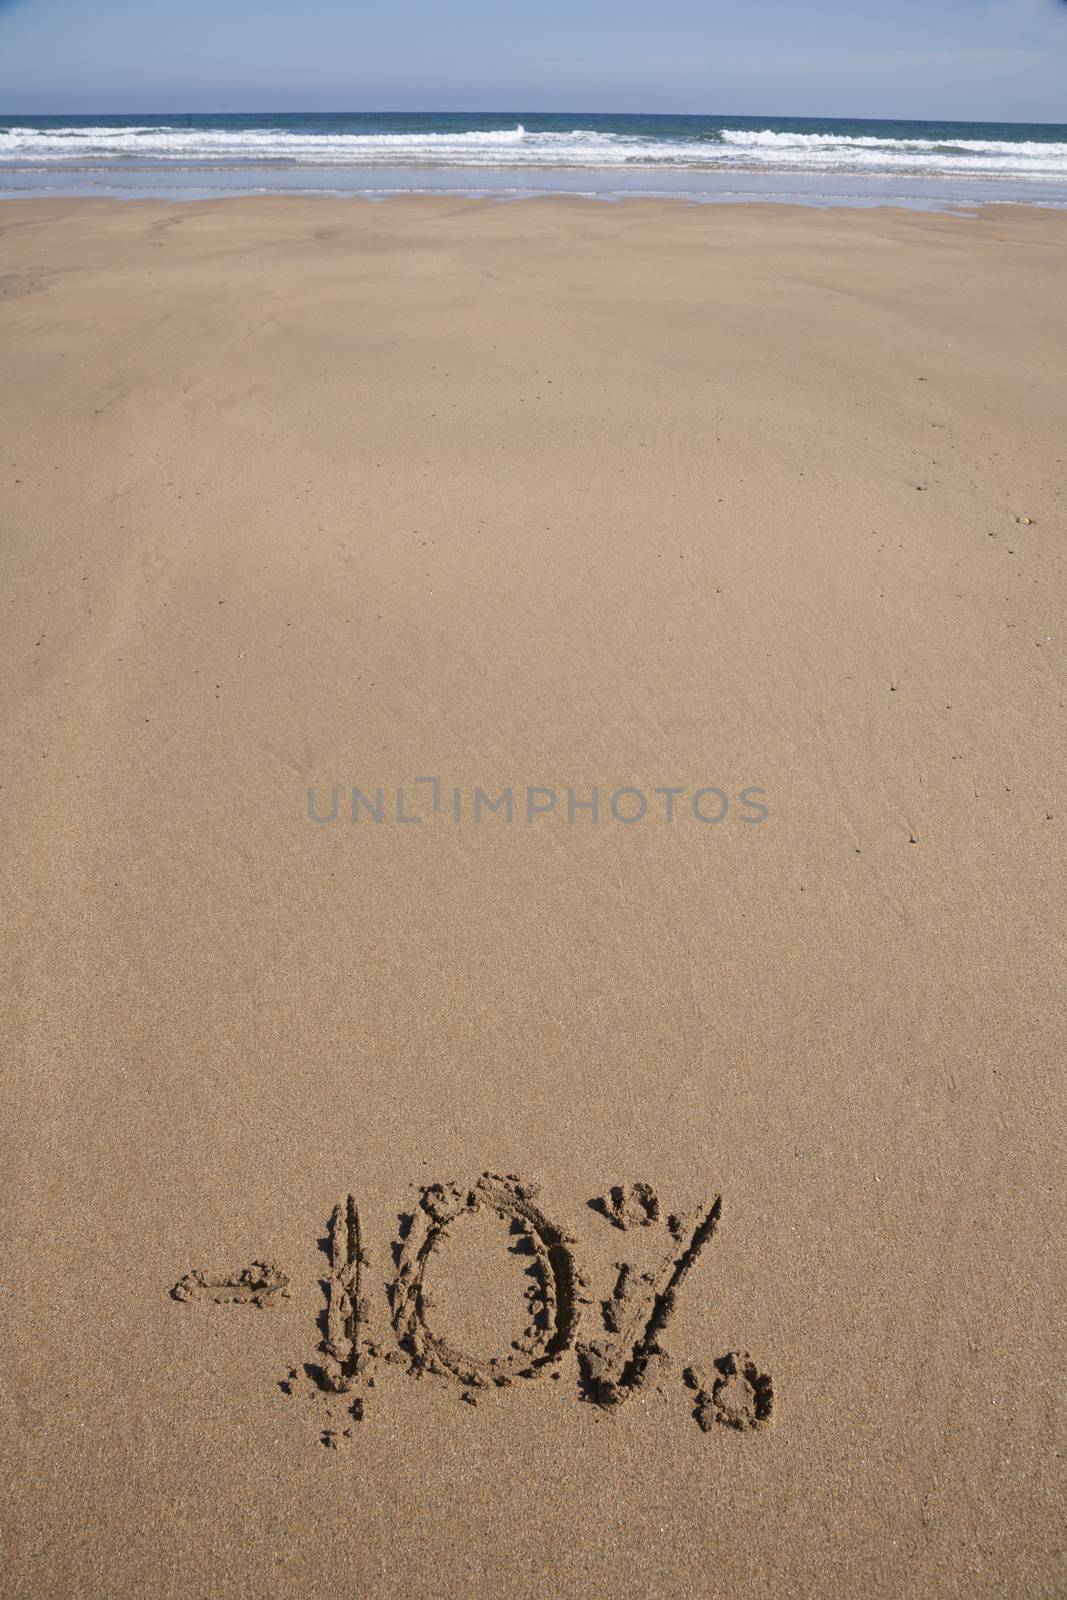 10 percent discount in earth text written on brown sand ground low tide beach ocean seashore in Spain Europe